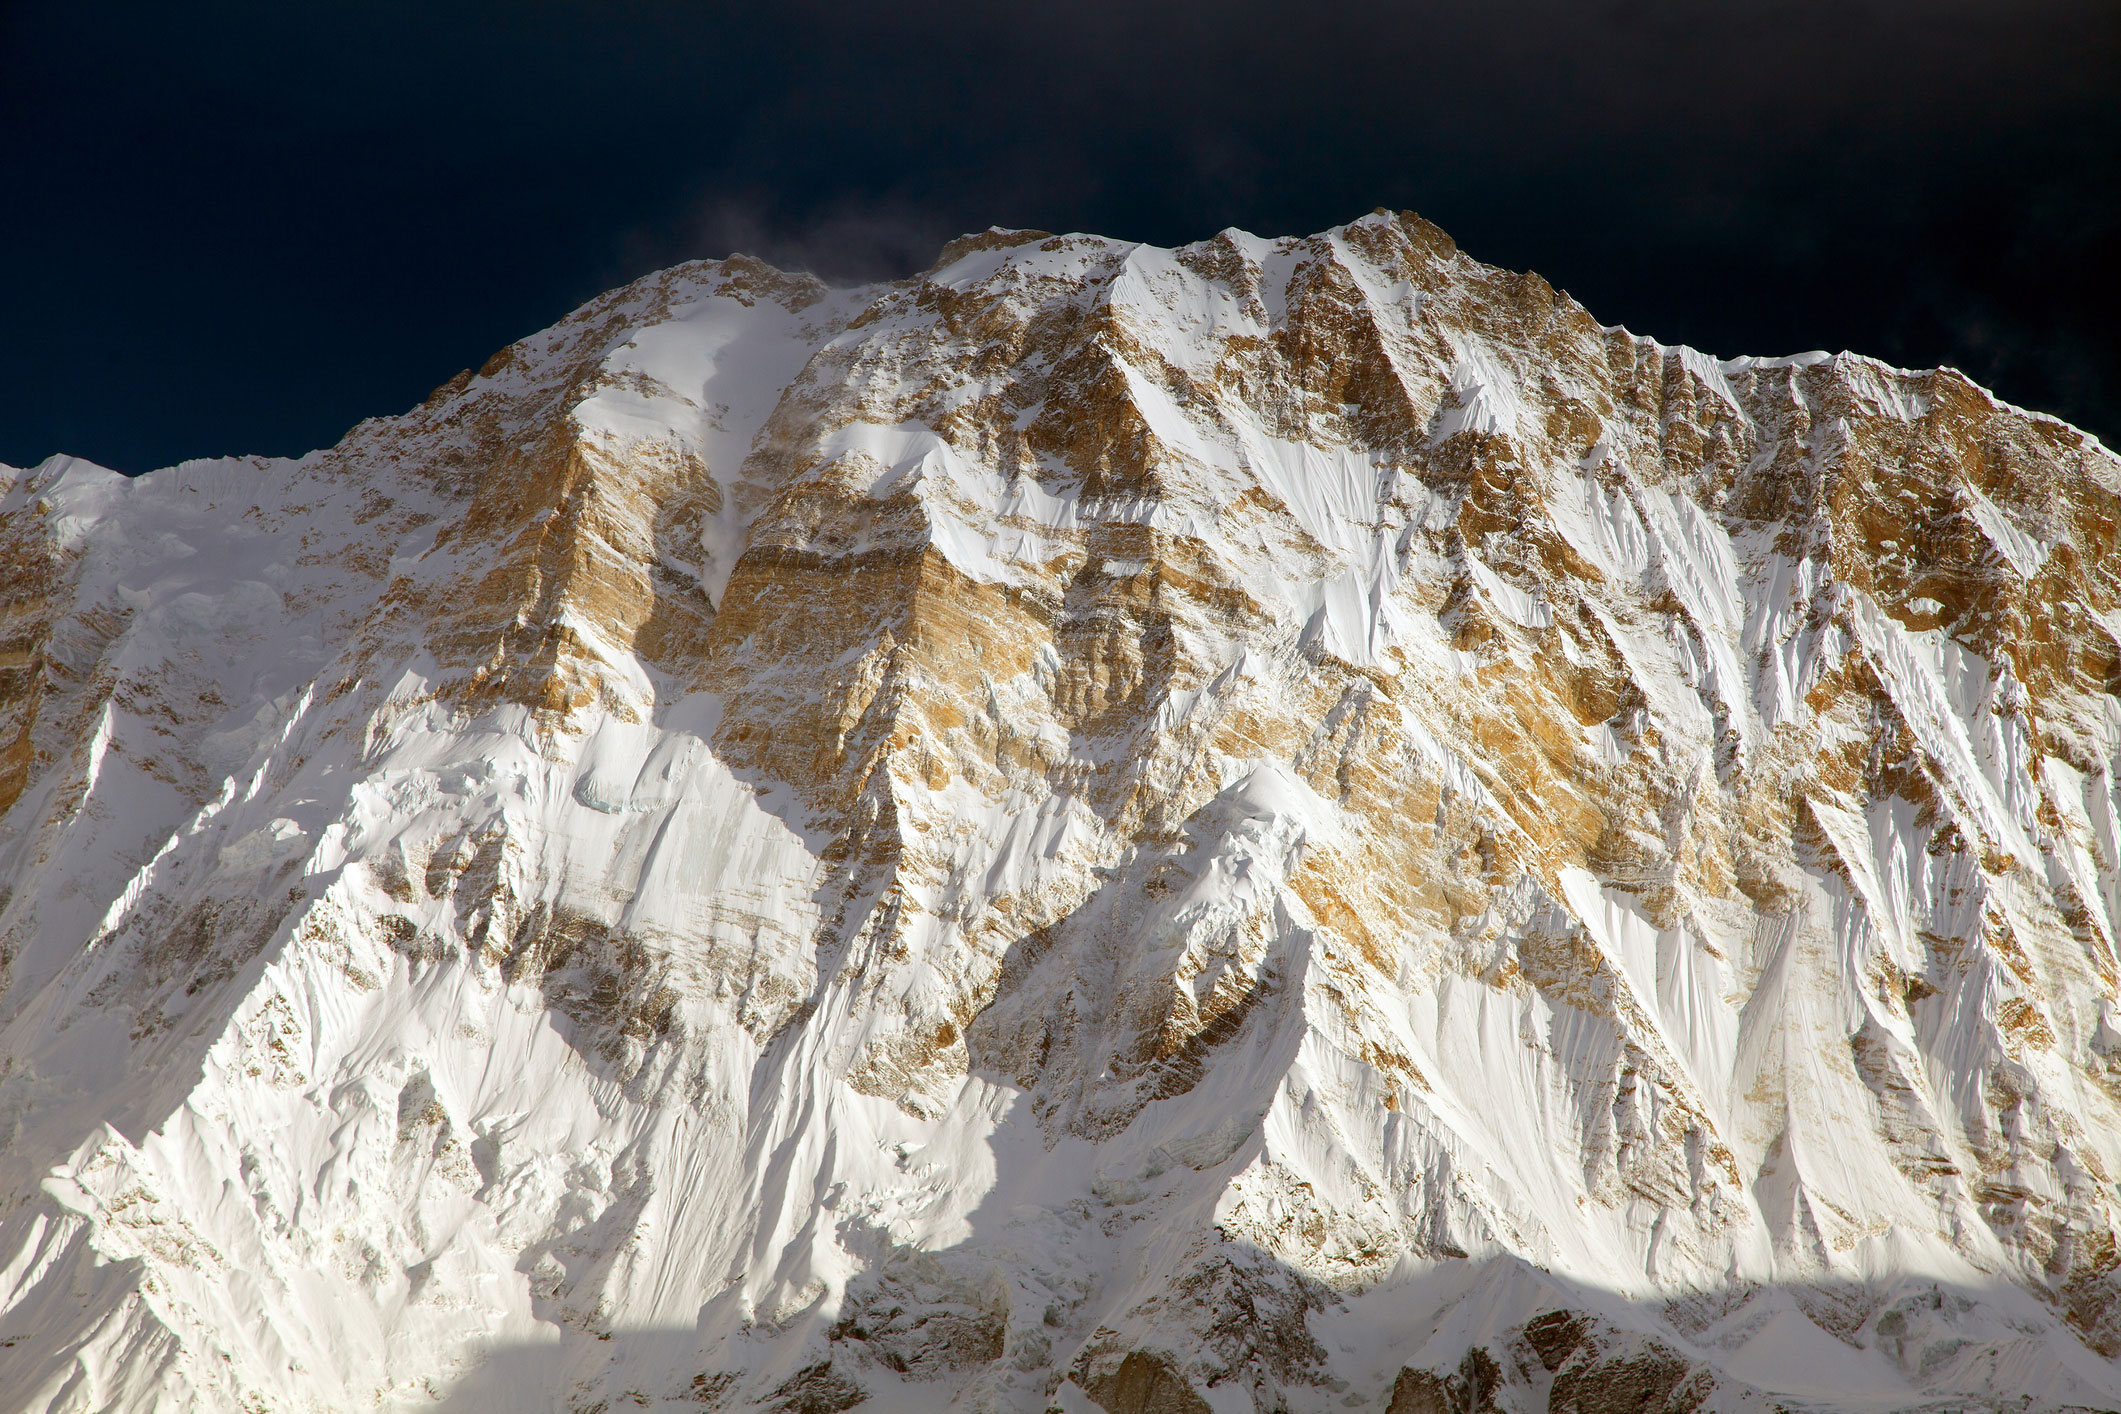 annapurna-most-dangerous-mountain-in-the-world